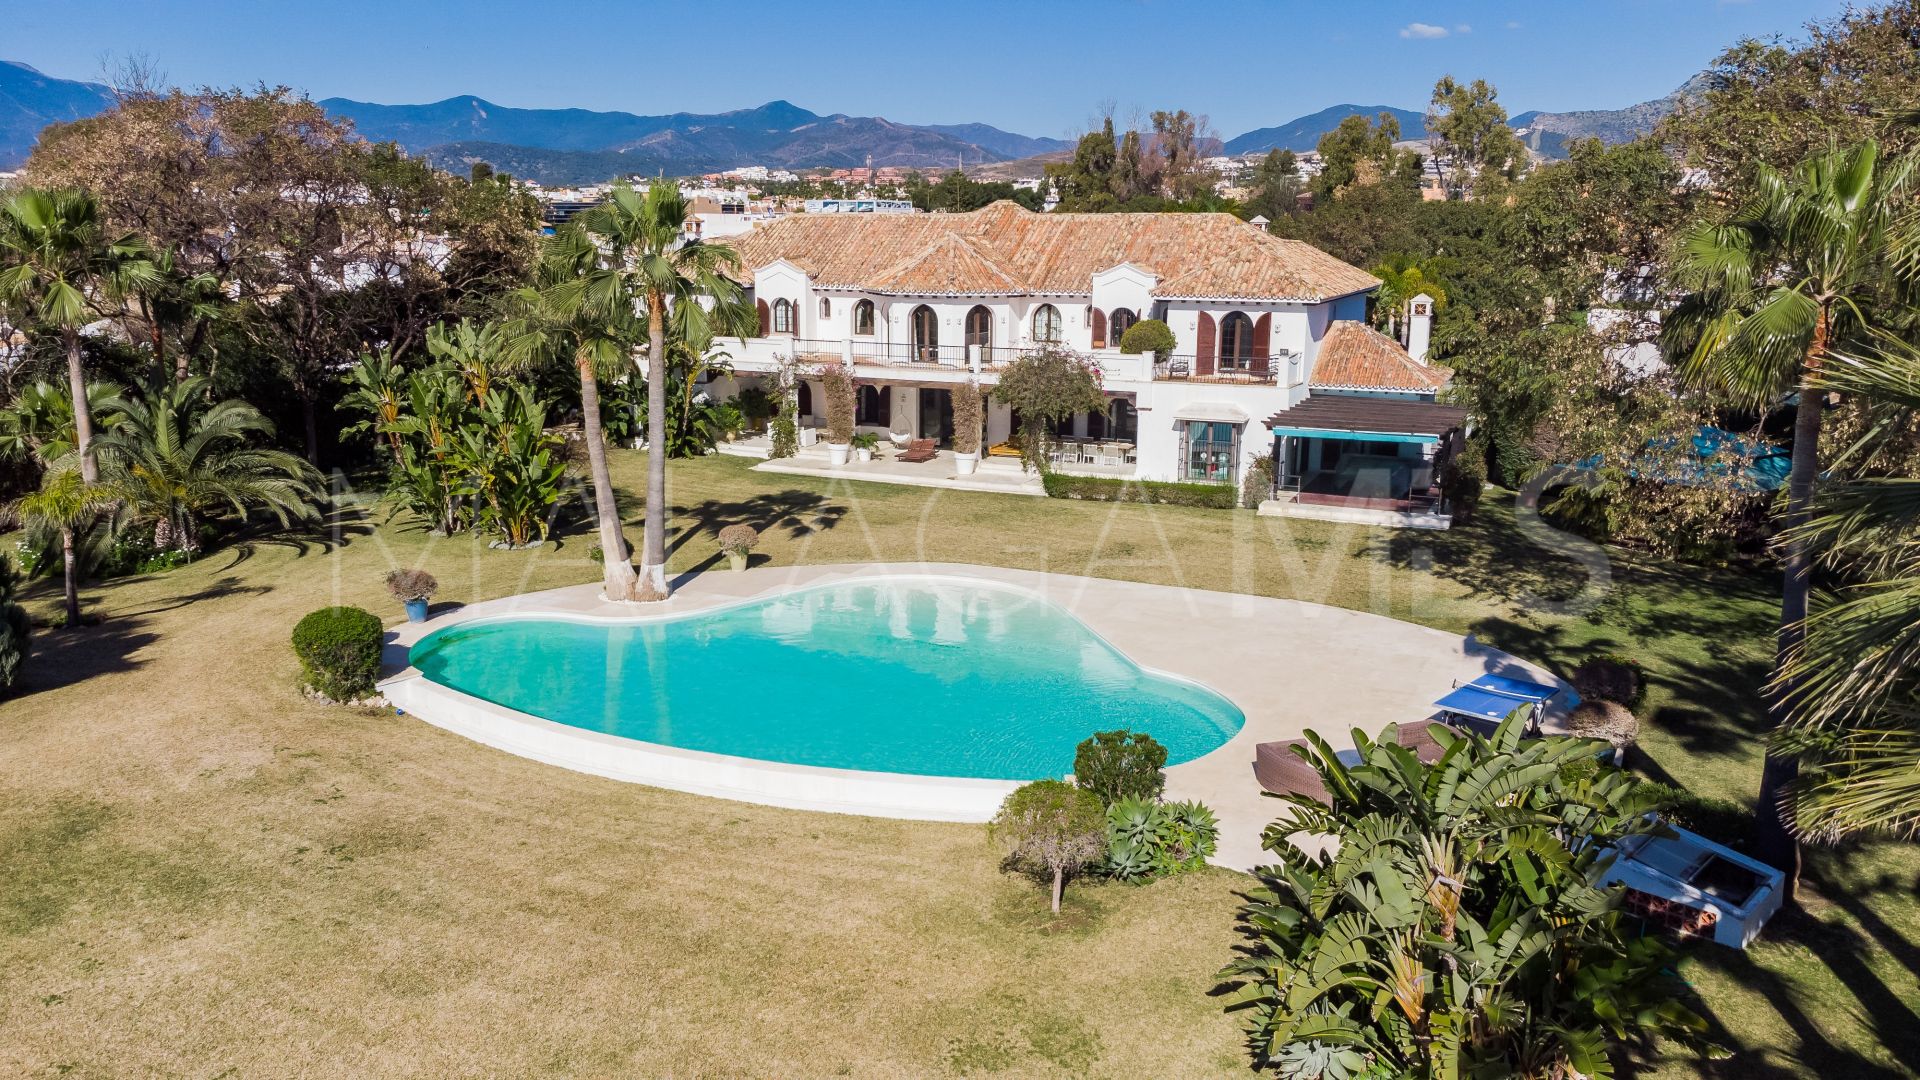 For sale villa with 8 bedrooms in Paraiso Barronal